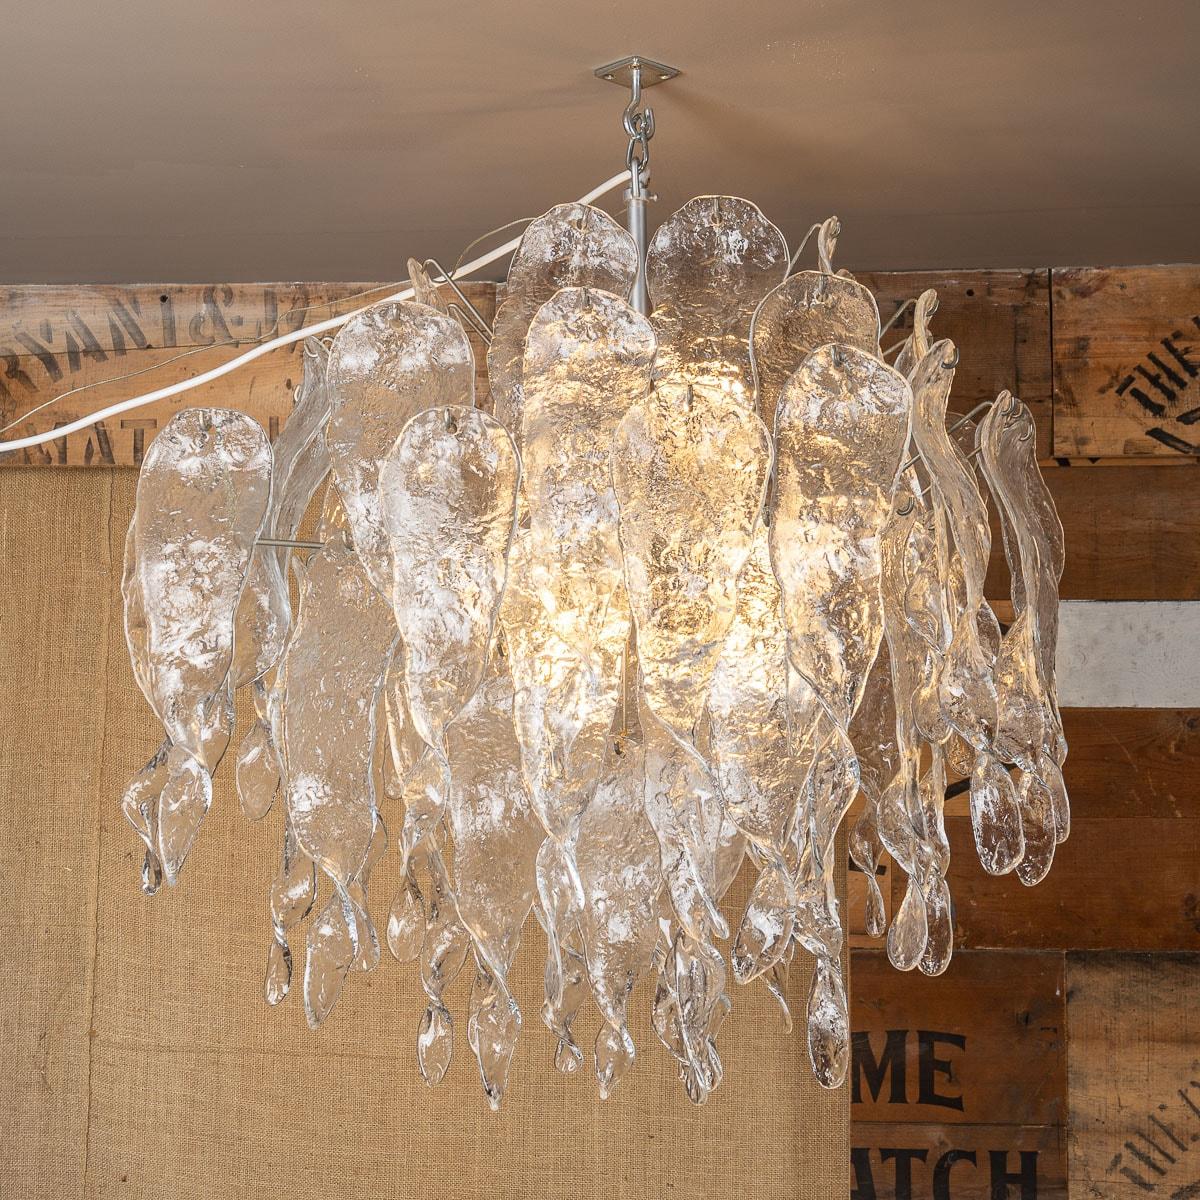 Crafted in Murano, Italy by Mazzega during the late 20th century, this drop chandelier embodies a unique and exquisite style. The chandelier's structure is meticulously fashioned from high-quality Murano glass. Its pendant design boasts long,